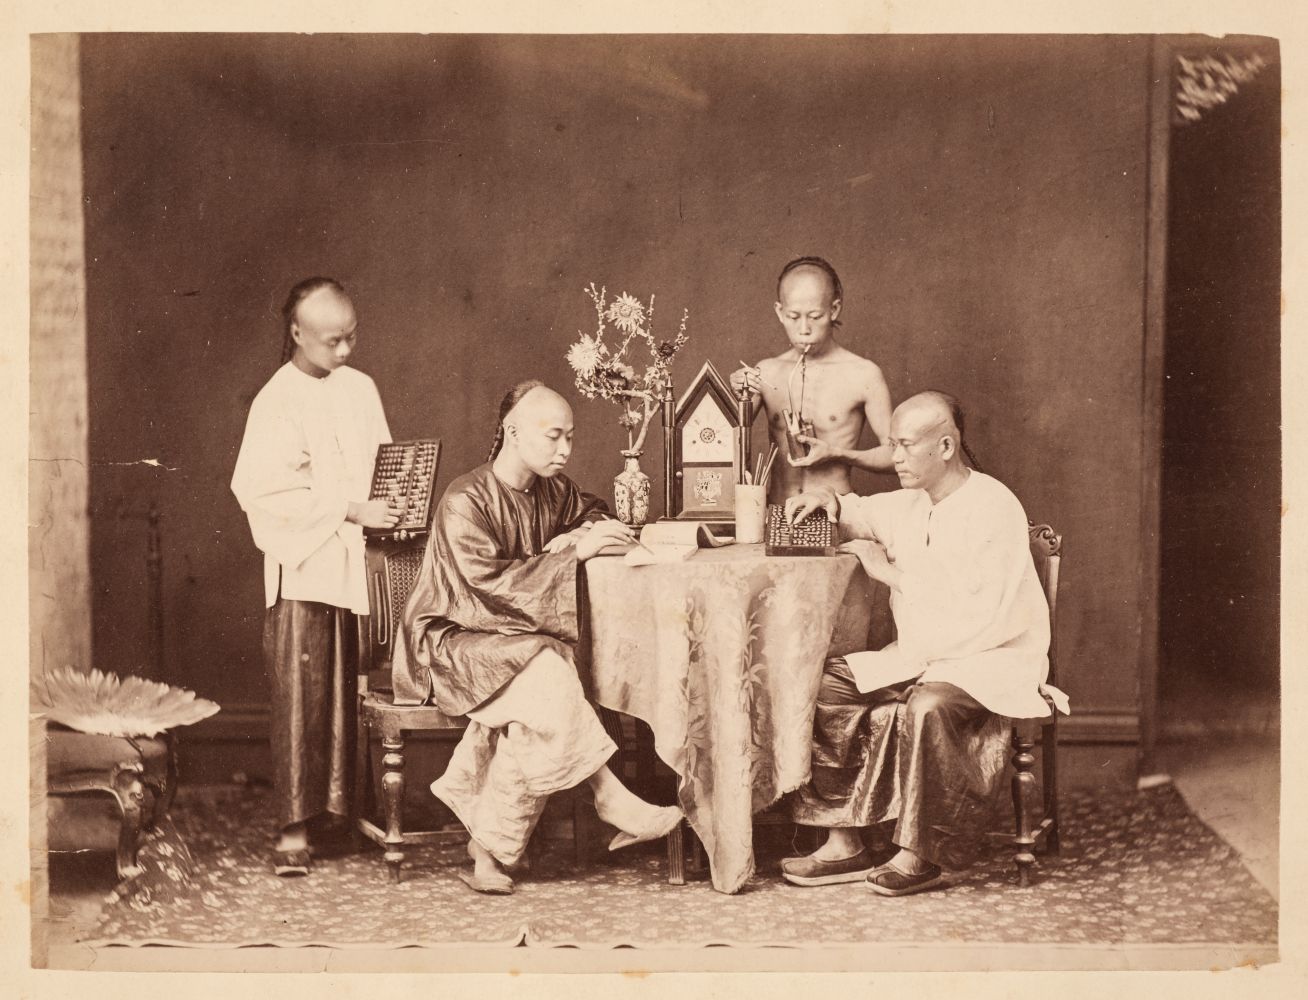 China. Chinese Merchants [and] Chinese people about to eat, both by Pun Lun, c. 1870 - Image 2 of 3